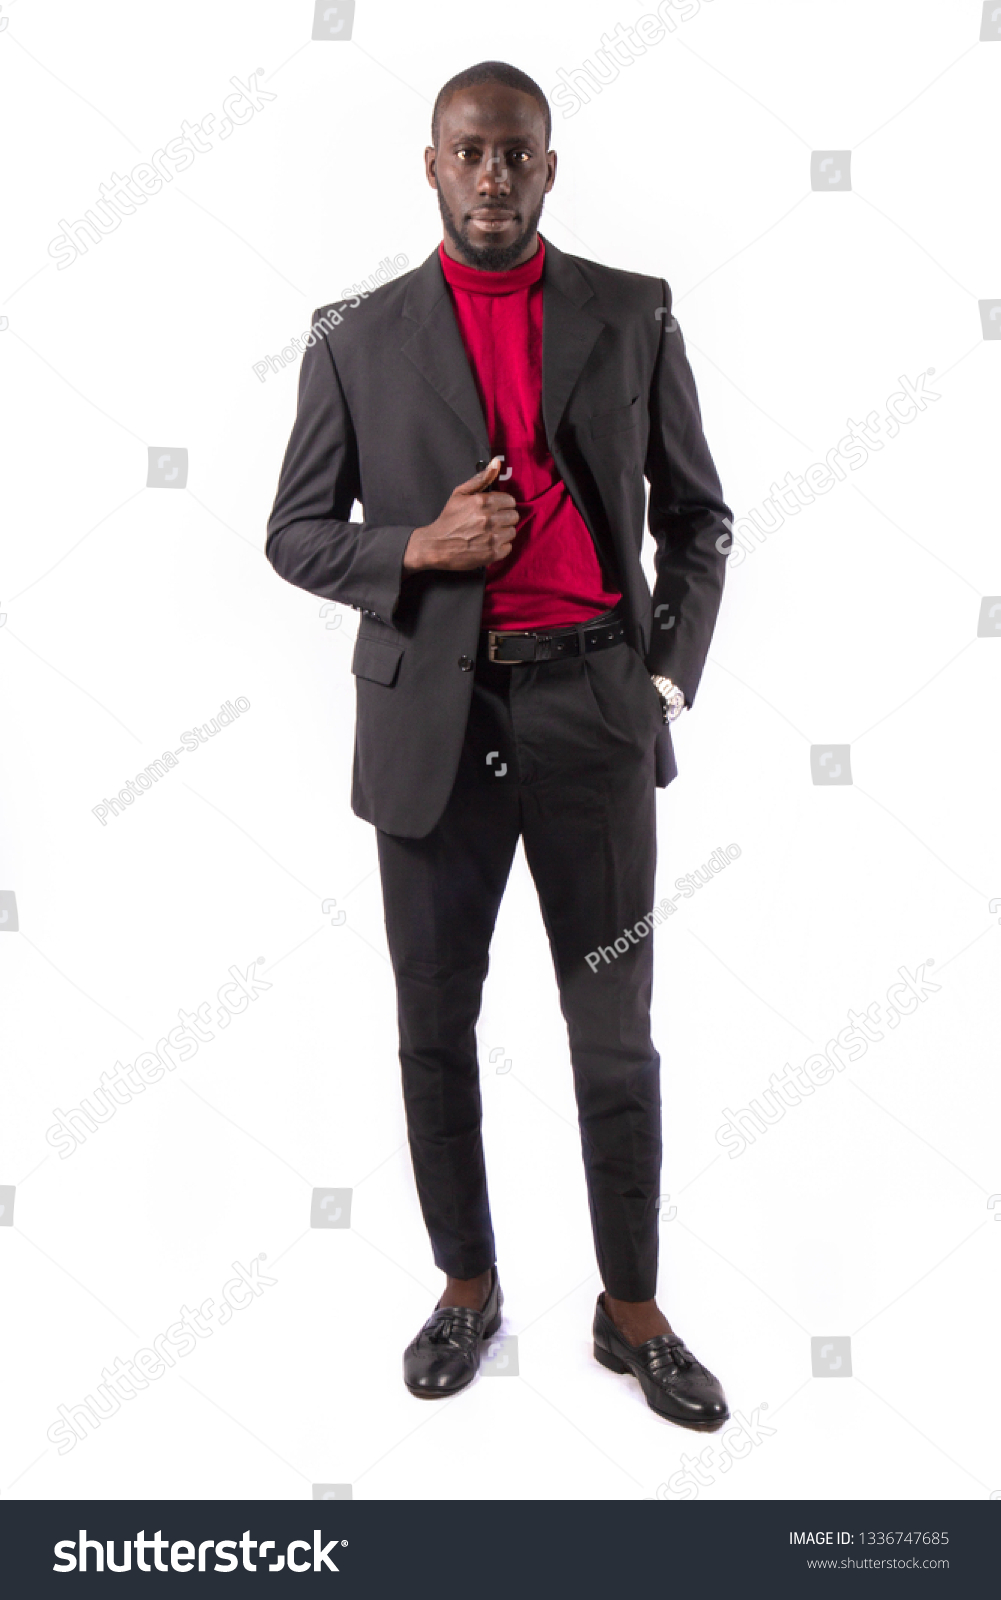 Young and handsome. Handsome young African senegalese man in smart casual jacket holding hands in pockets and traditional smiling while standing against white background #1336747685